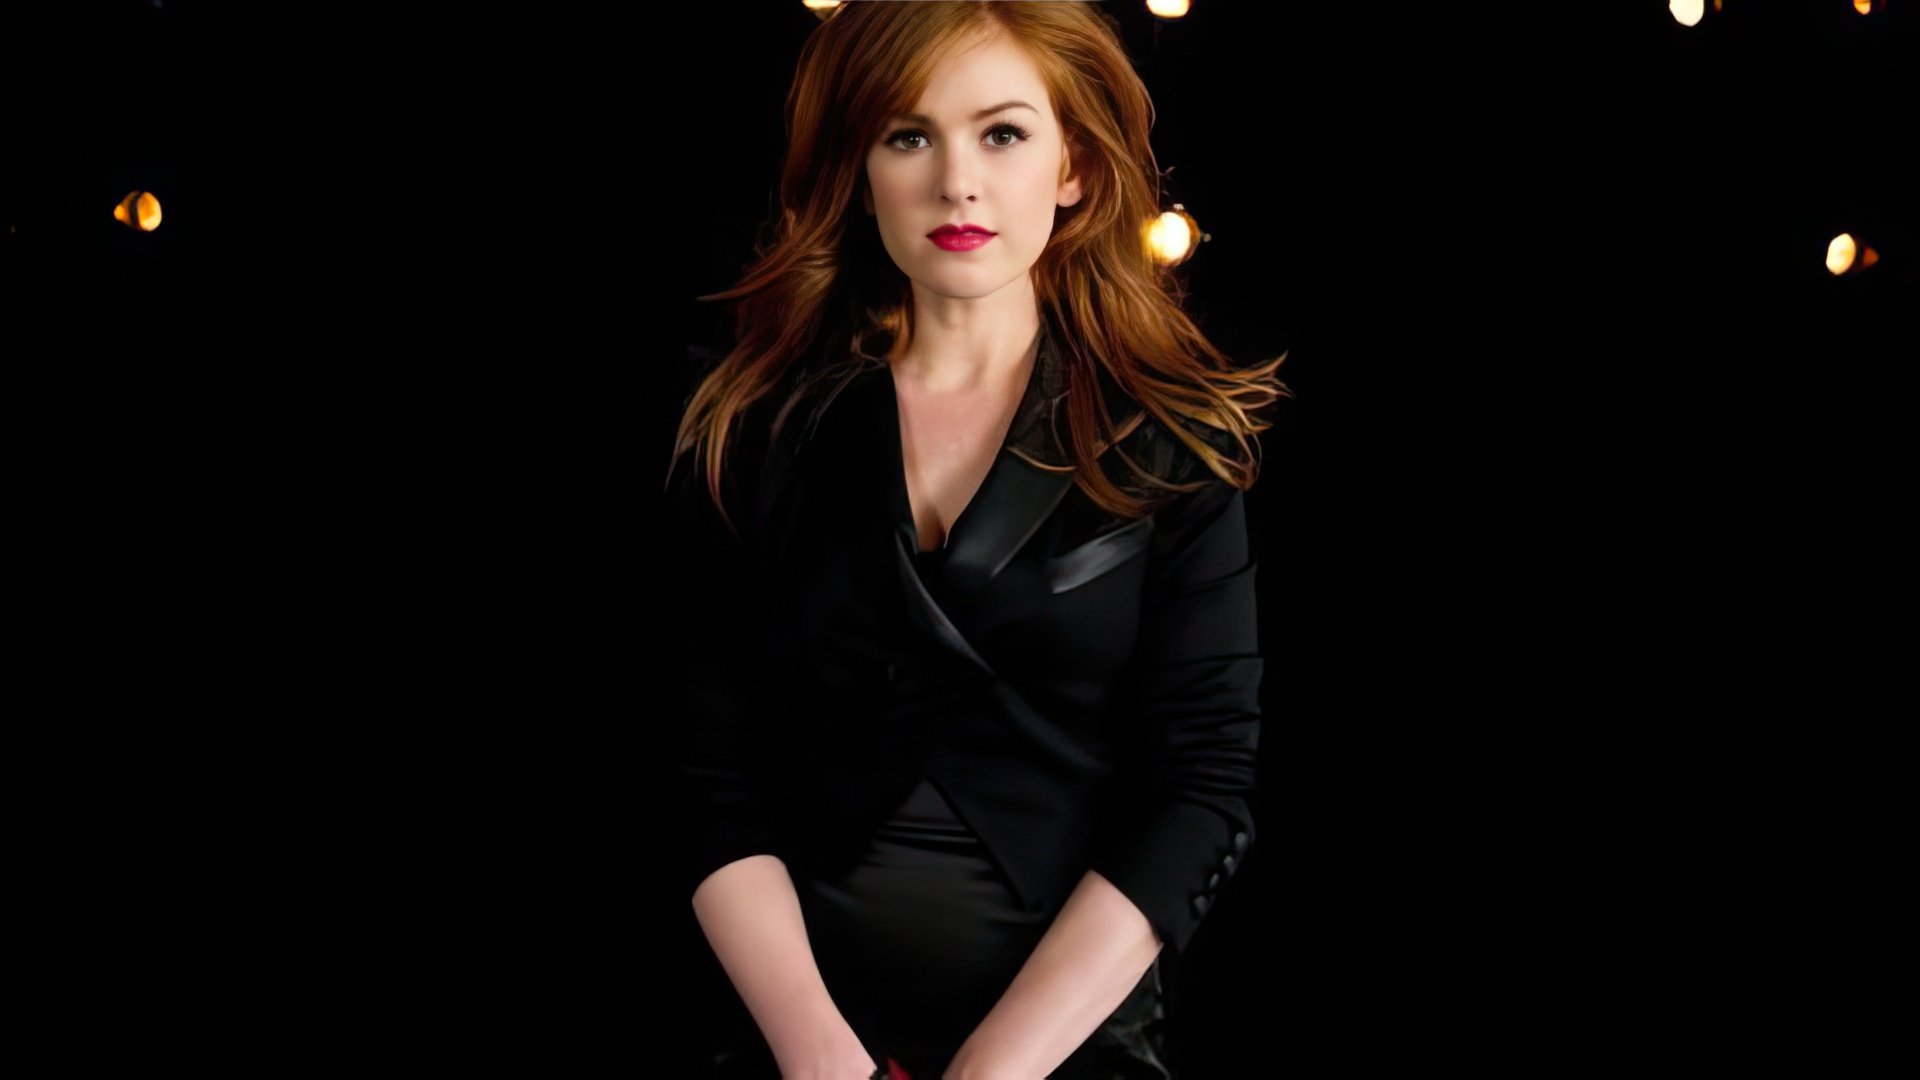 Now You See Me: Isla Fisher as illusionist Henley Reeves